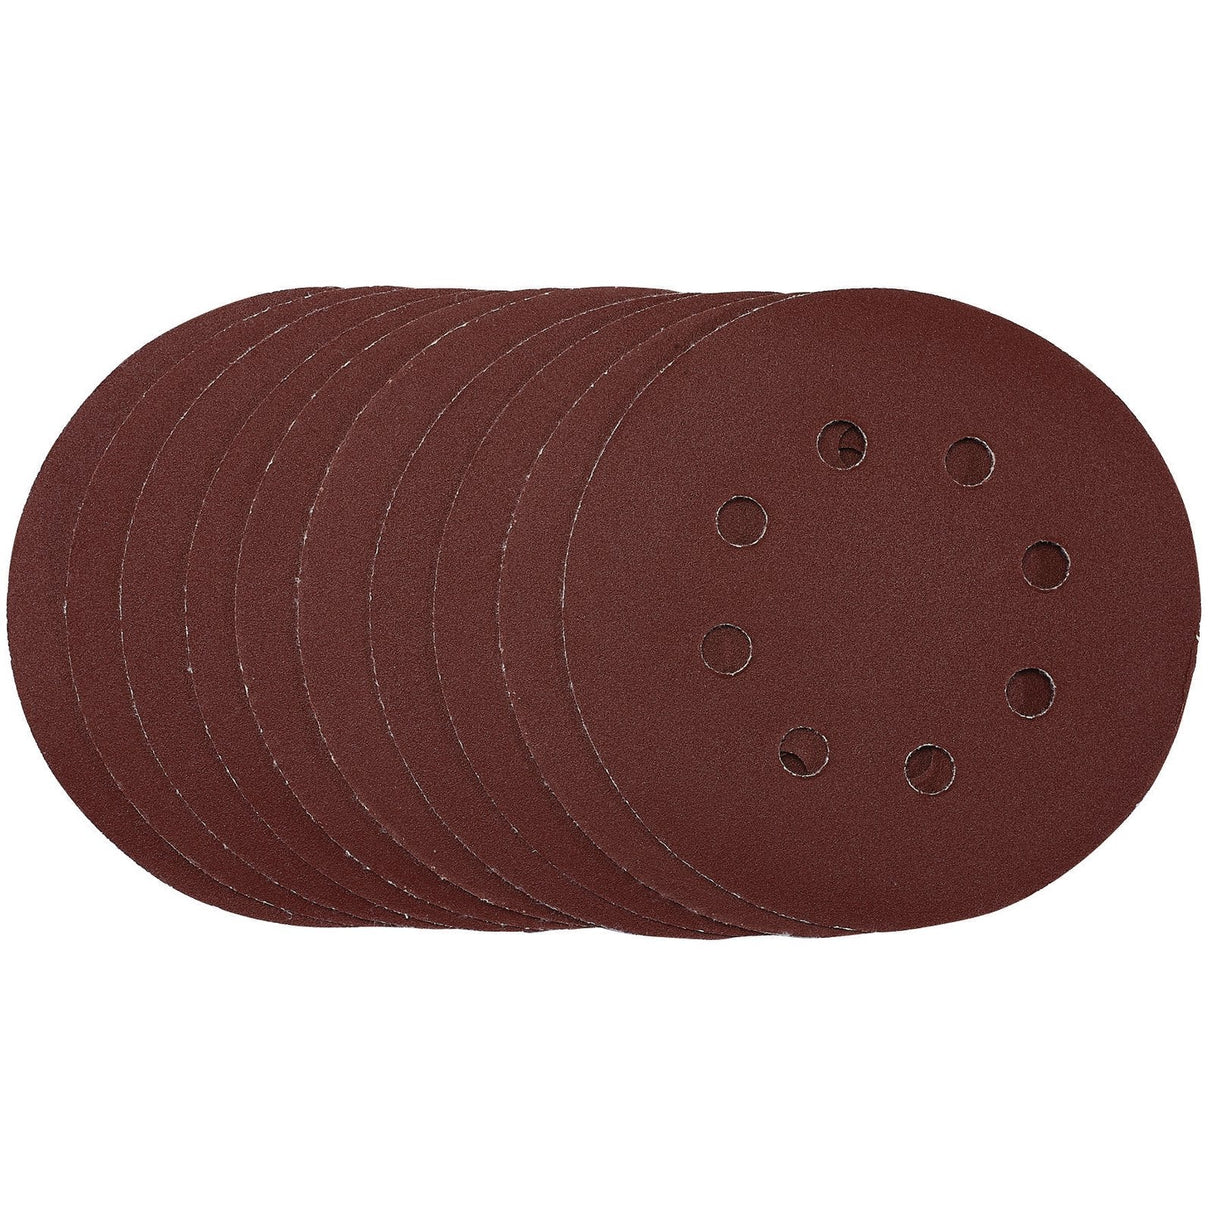 Draper Punched Sanding Discs, 125mm, Hook & Loop, 240 Grit, (Pack Of 10) - SDHAL125 - Farming Parts